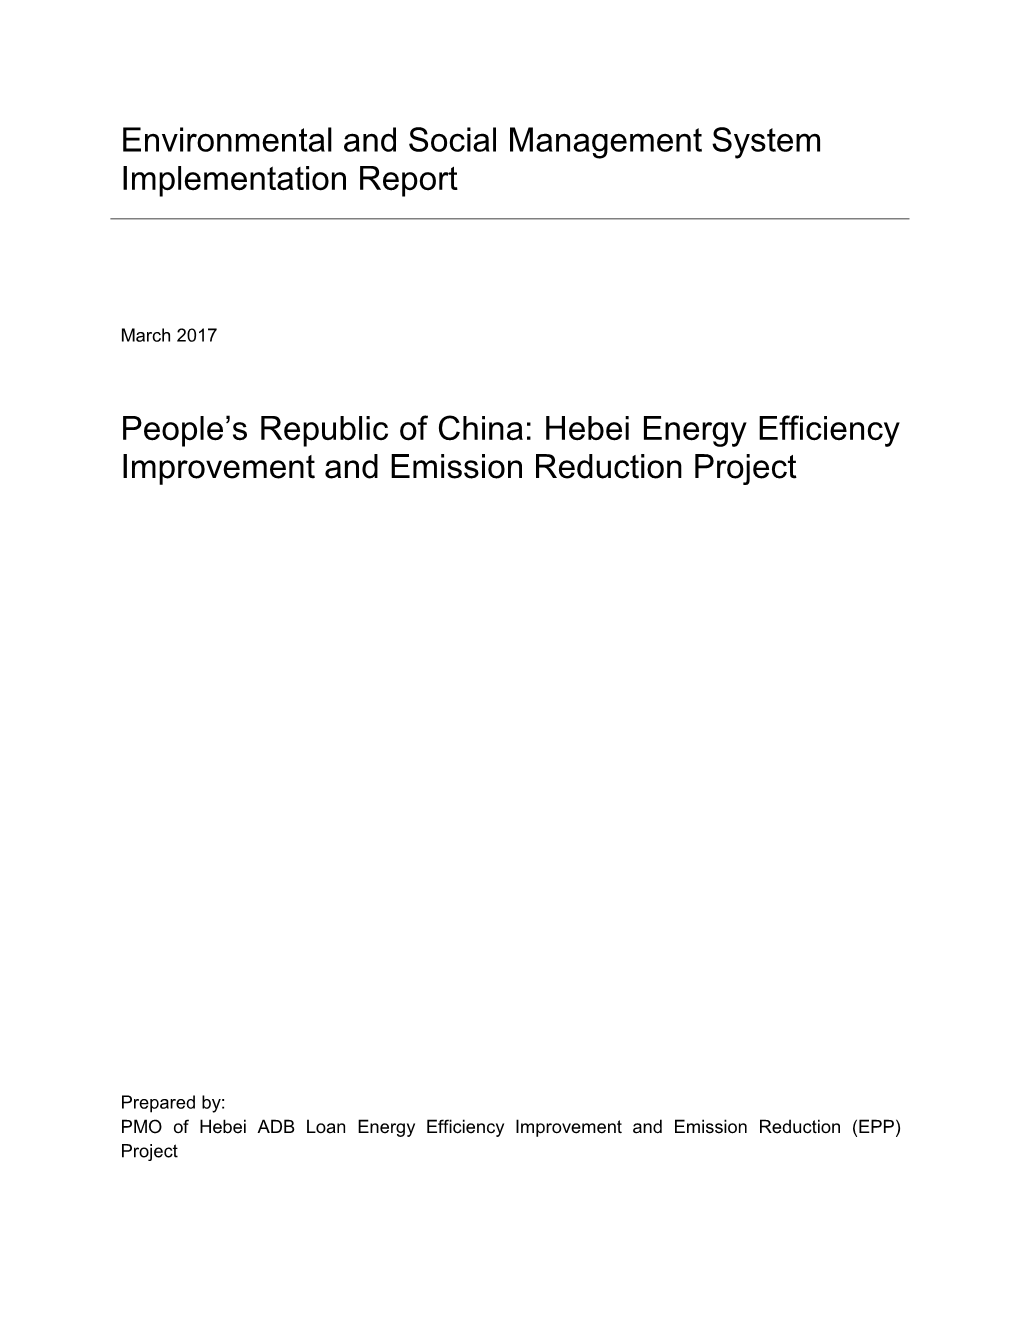 Environmental and Social Management System Implementation Report People's Republic of China: Hebei Energy Efficiency Improveme